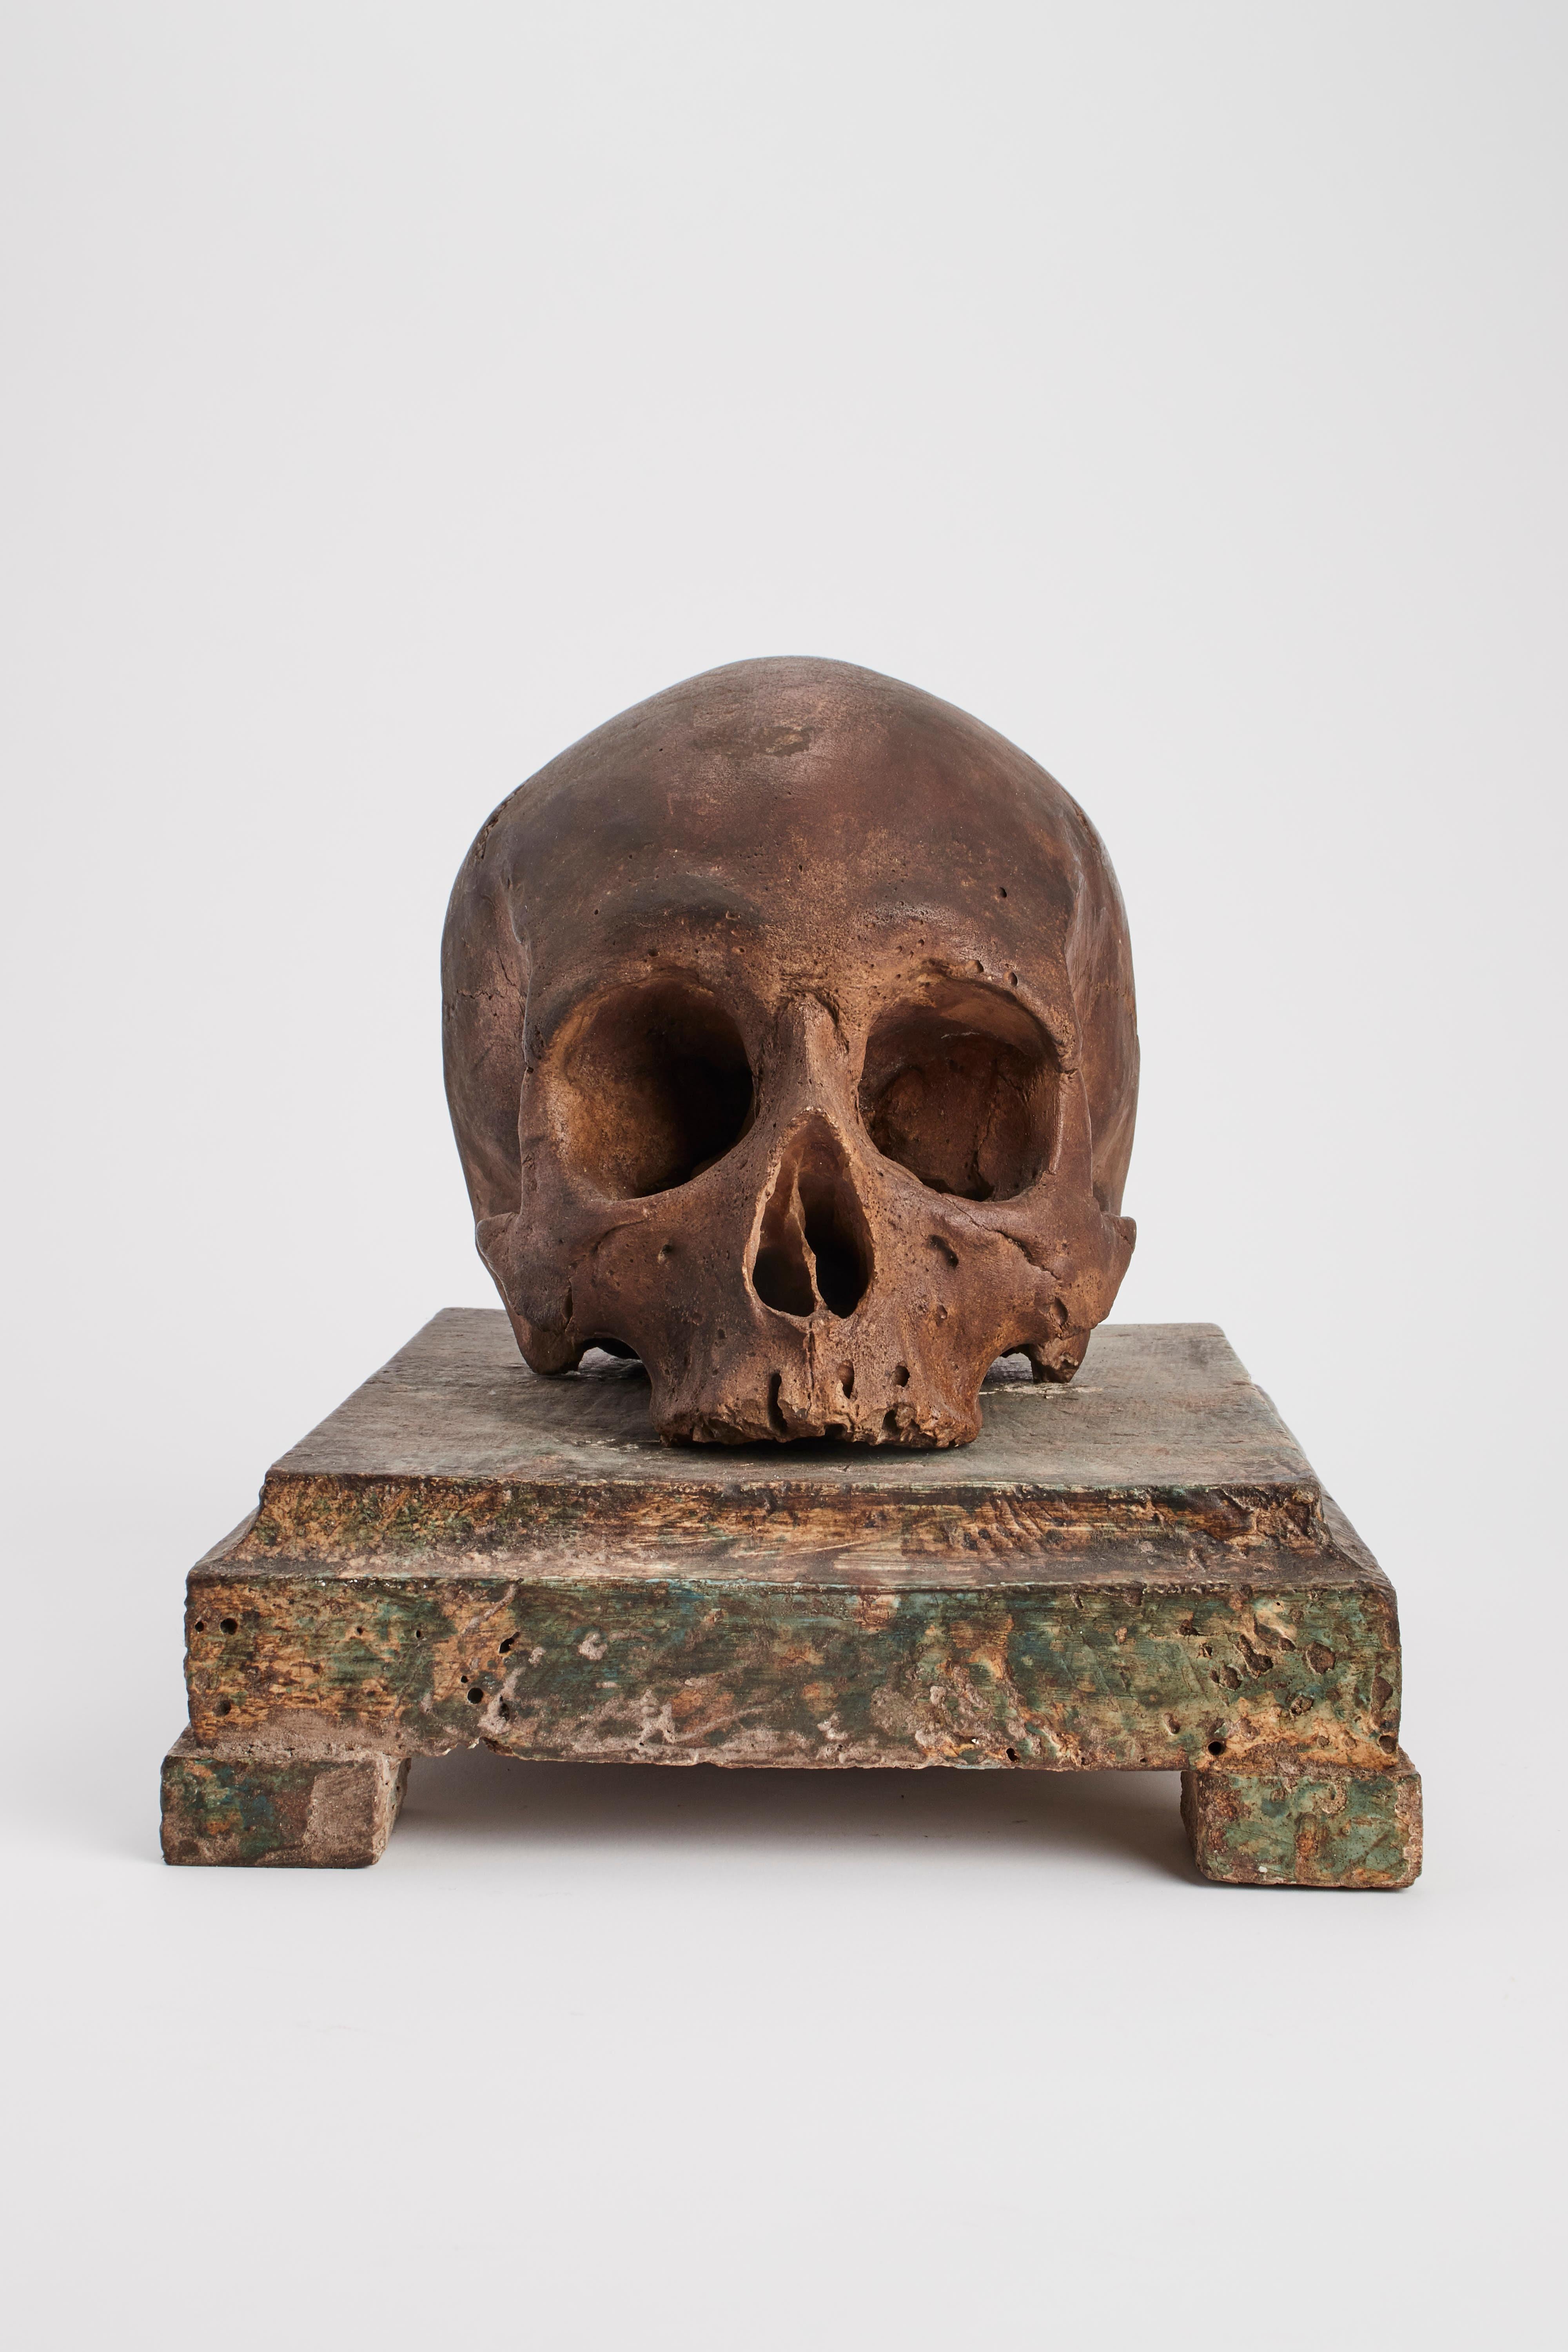 Painted plaster memento mori skull over a painted wooden base.? Italy 1880 ca.